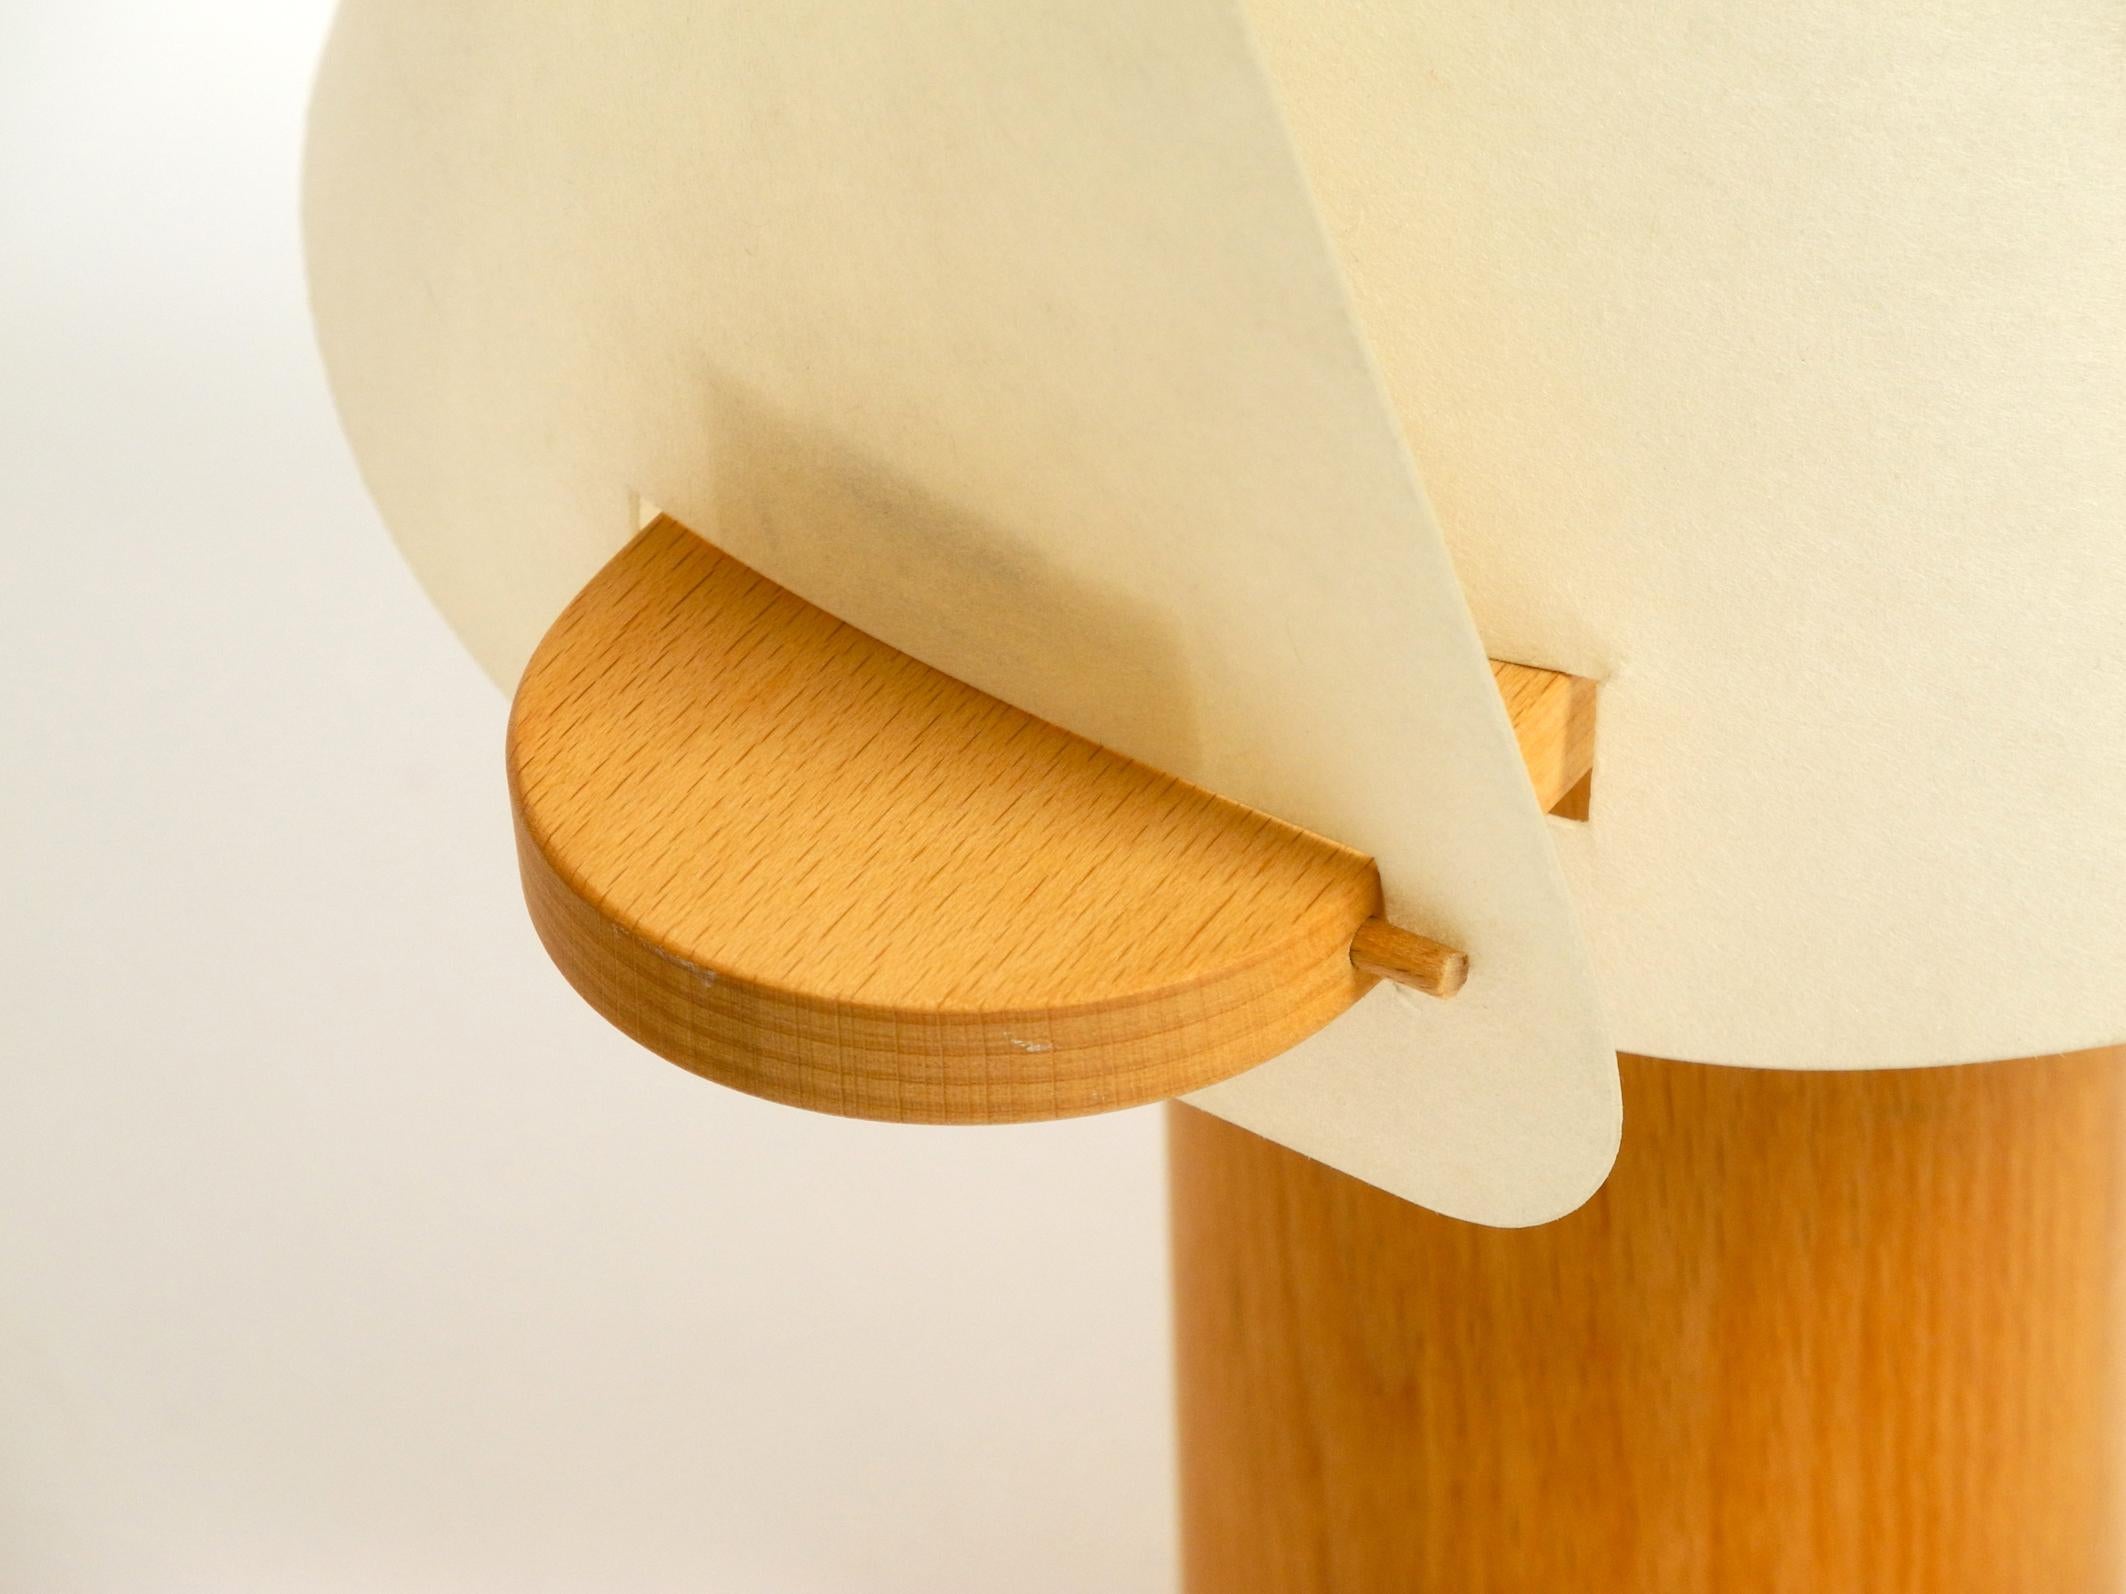 Two Charming Minimalistic Oak Table Lamps with Lunopal Shades by Domus  1980s For Sale 1